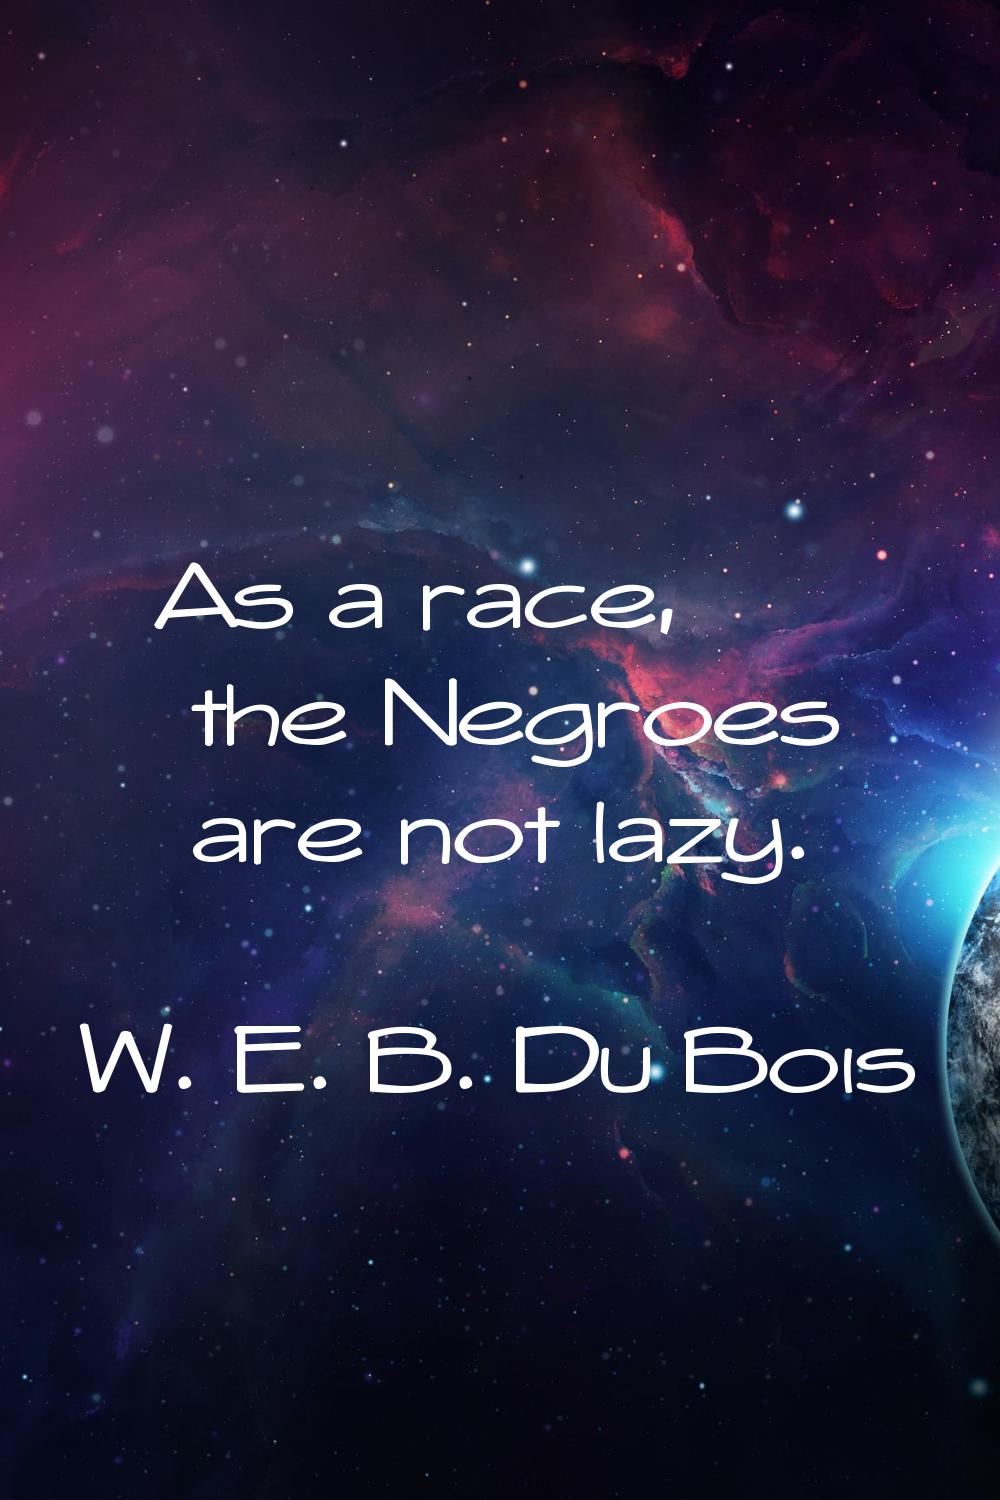 As a race, the Negroes are not lazy.